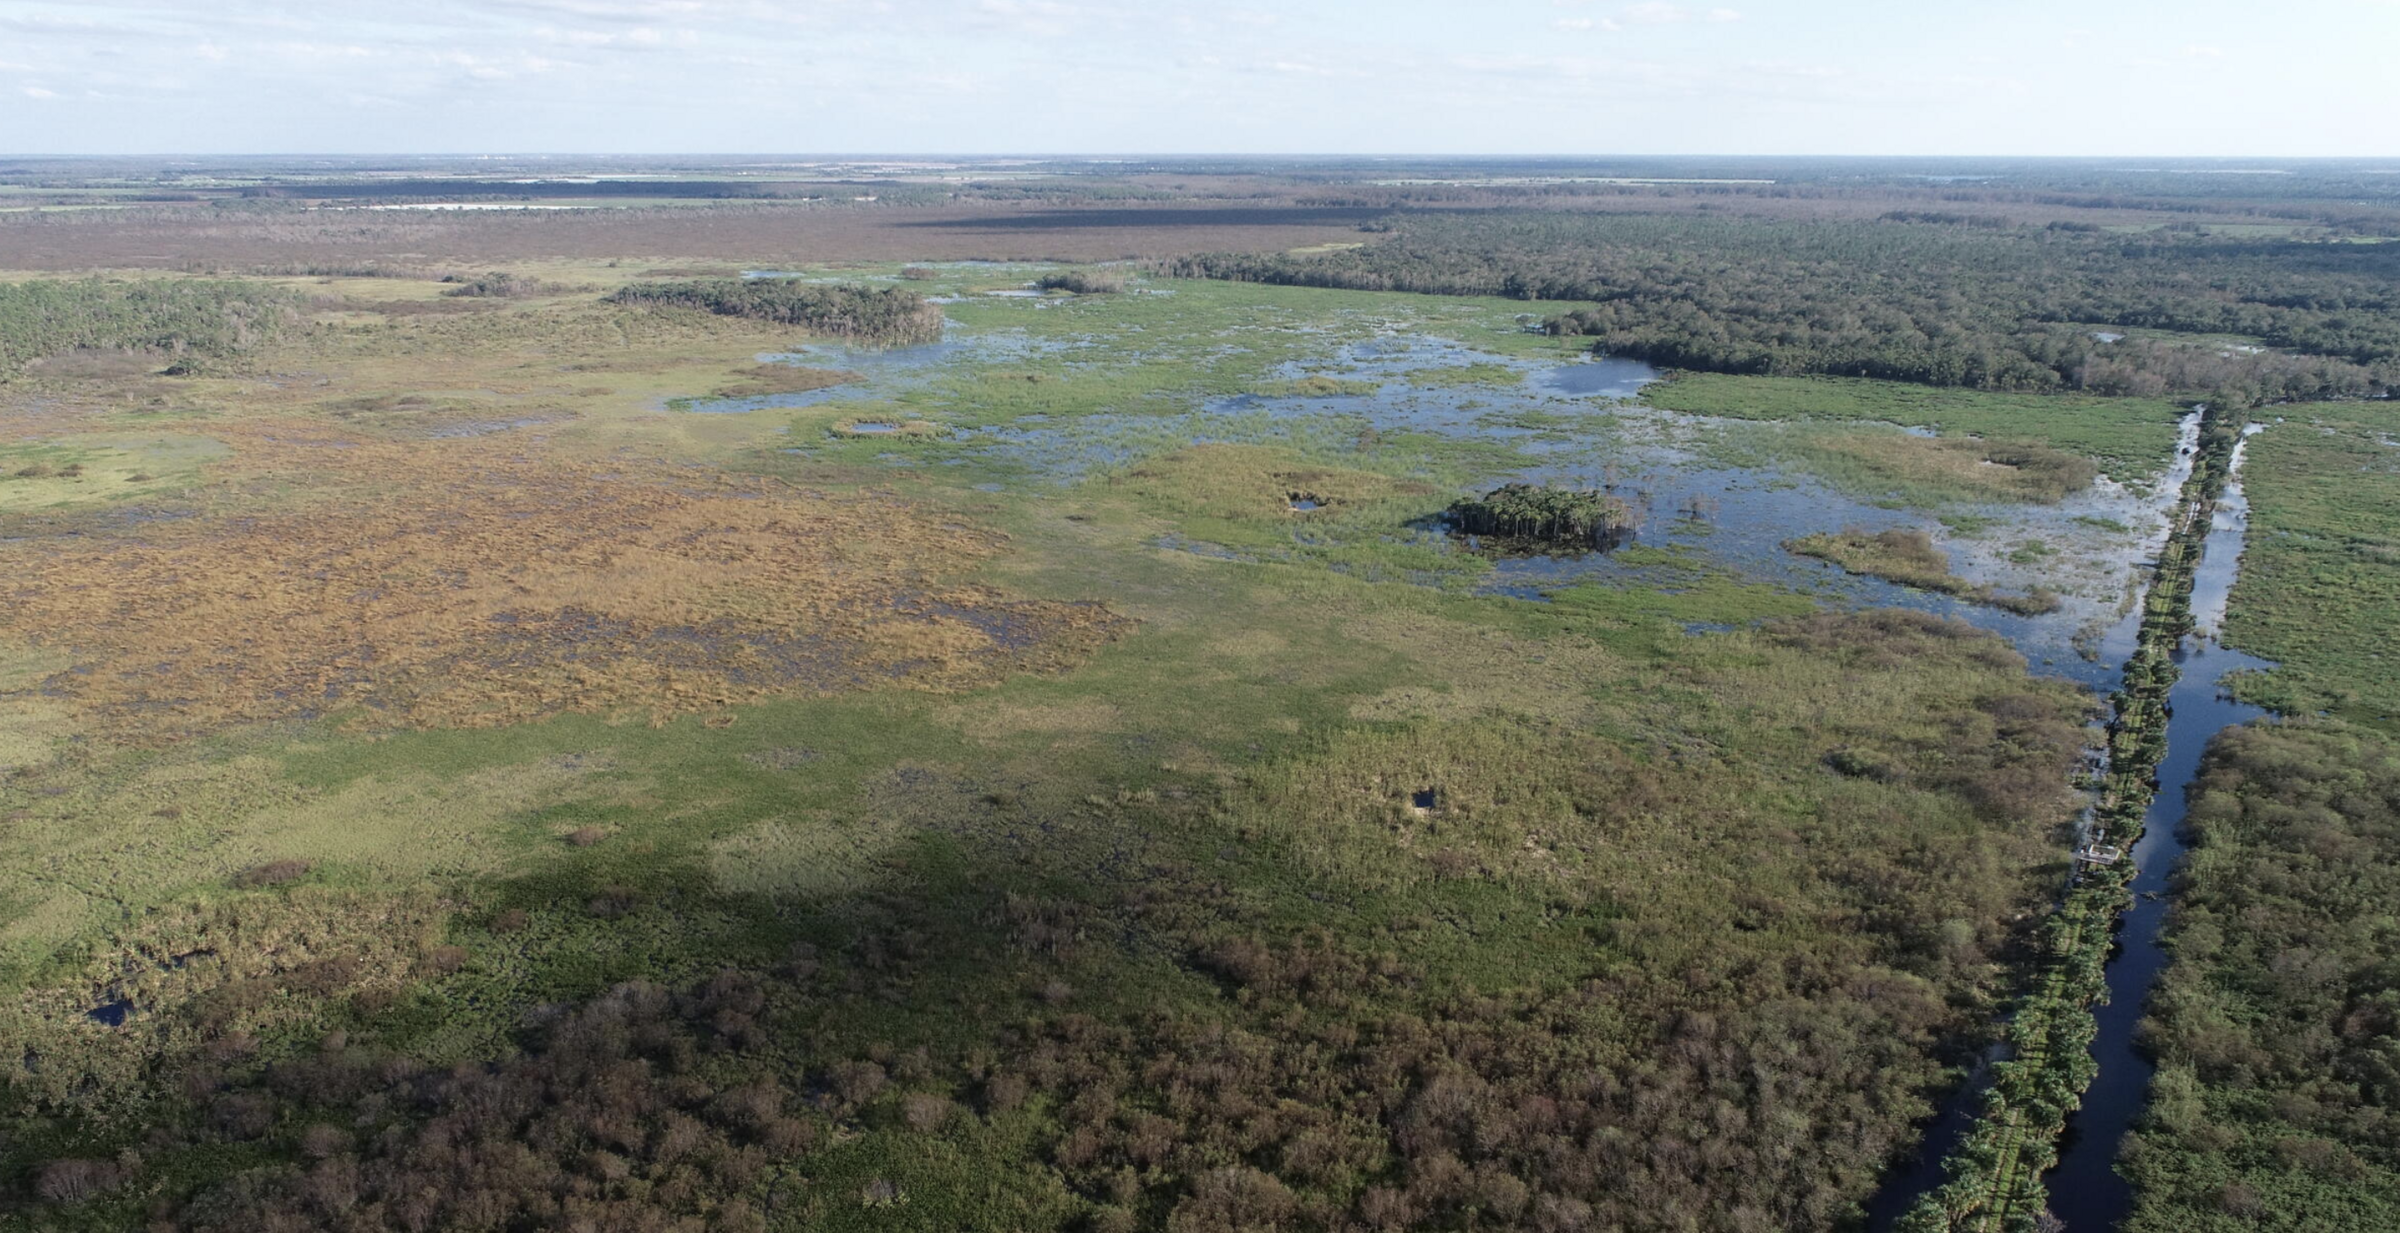 An aerial view of the restored wetland at Corkscrew Swamp Sanctuary.